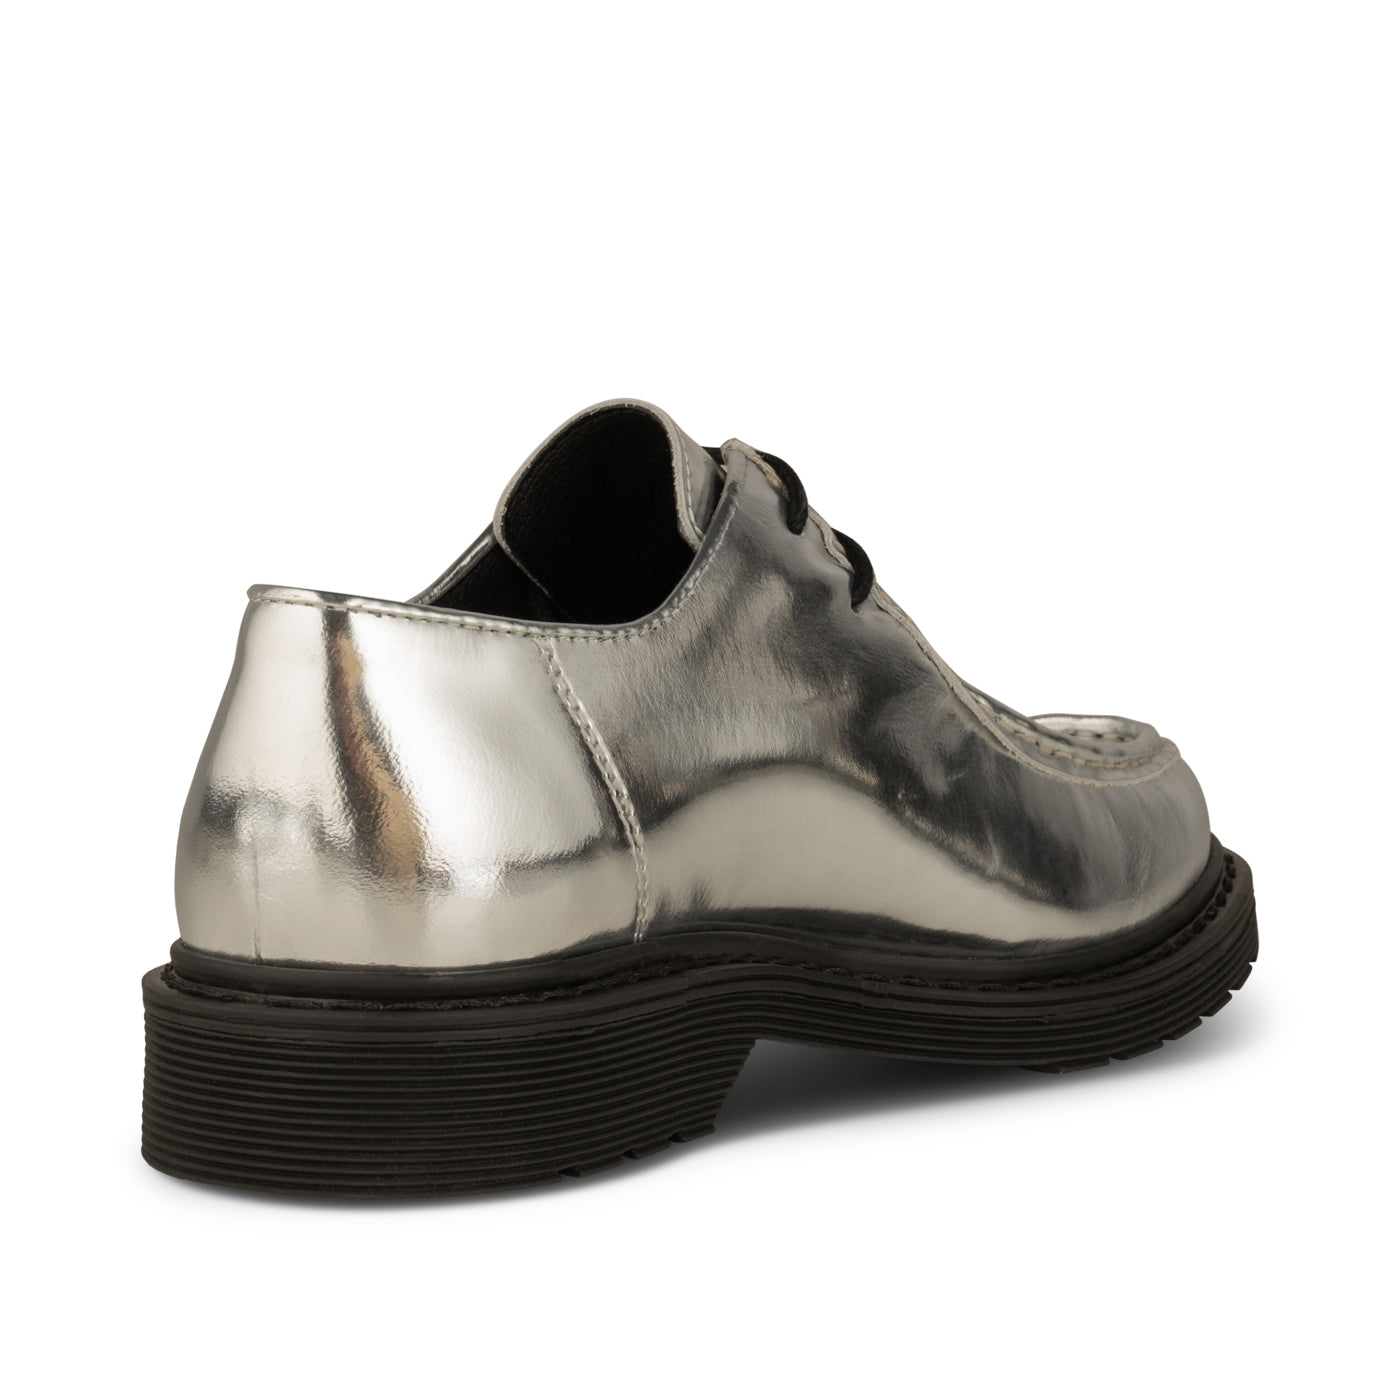 SHOE THE BEAR WOMENS STB-Nathalie Metallic Shoes 039 Silver